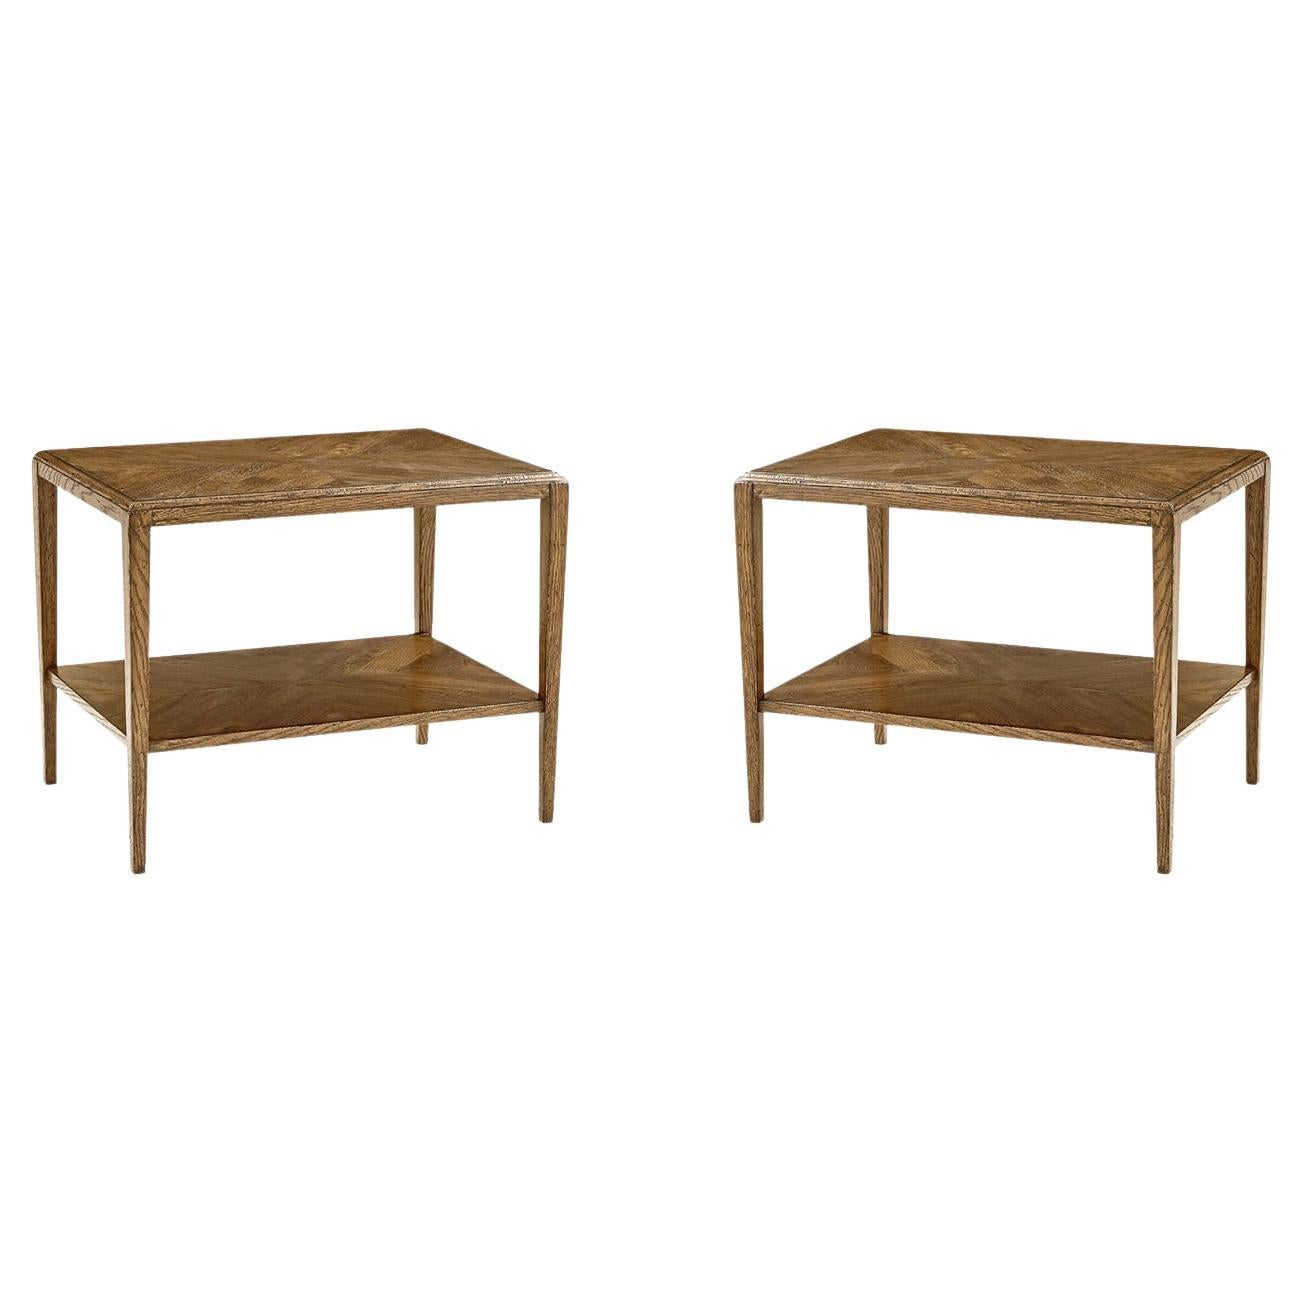 Pair of Rustic Oak Two-Tier Side Tables For Sale